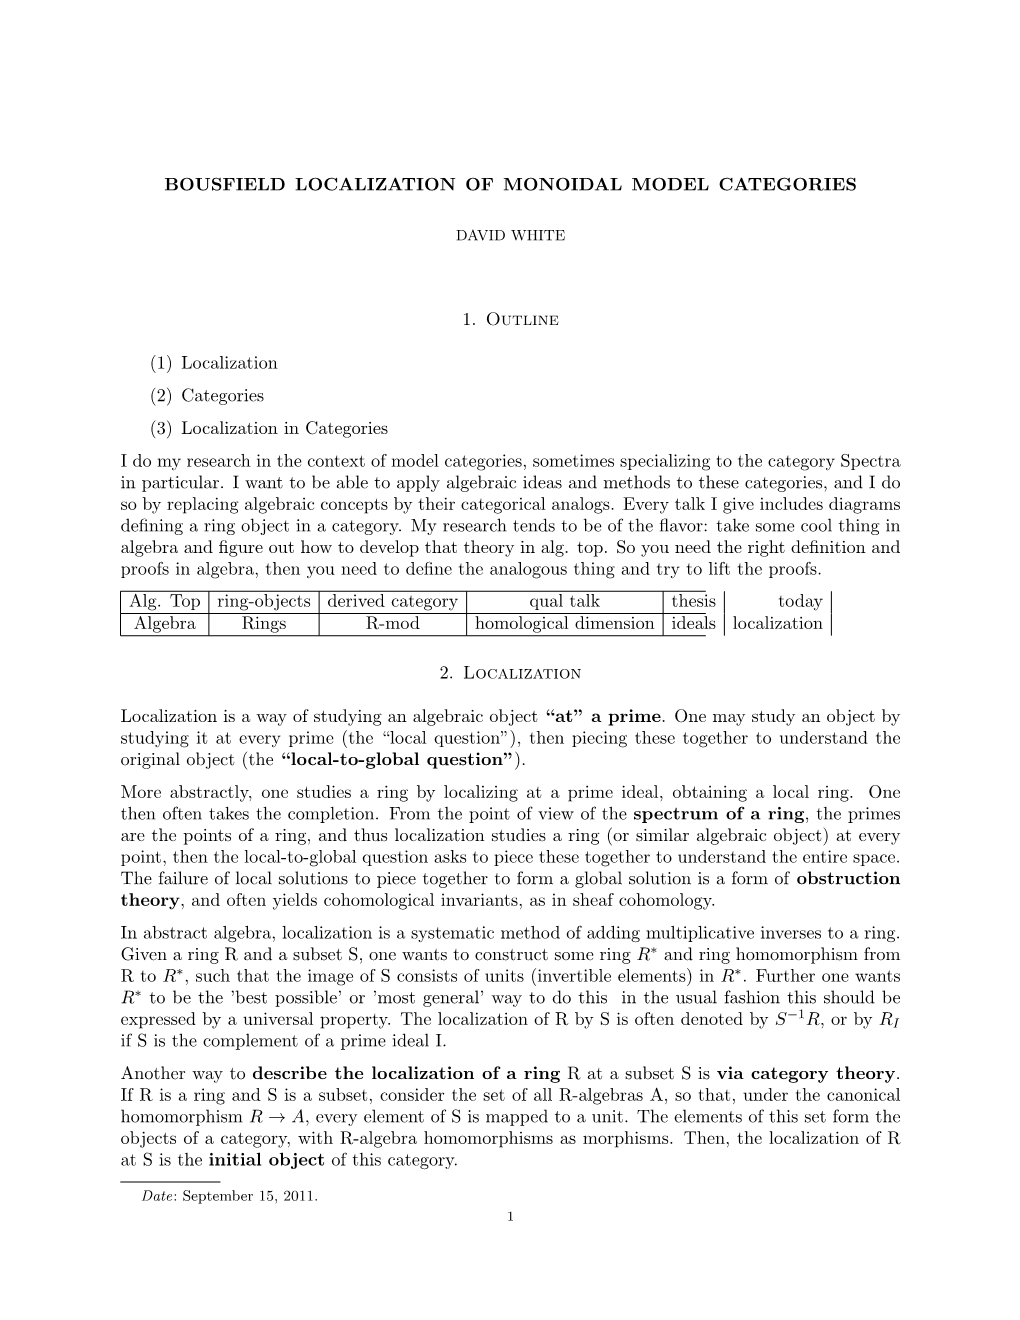 Bousfield Localization and Monoidal Model Categories